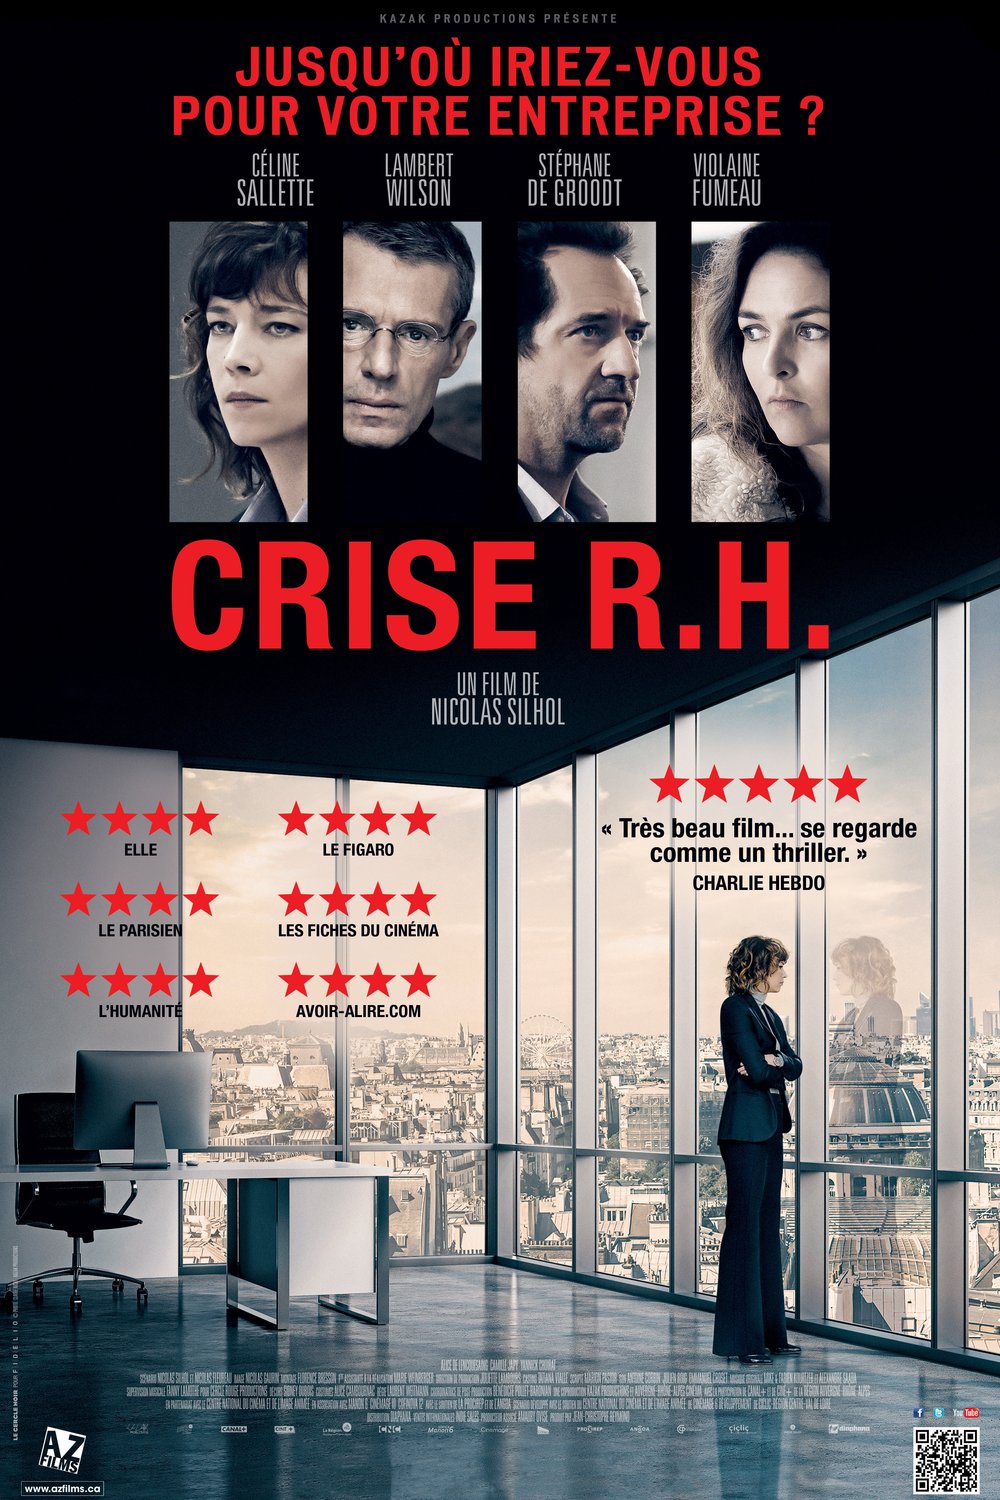 Poster of the movie Crise R.H.